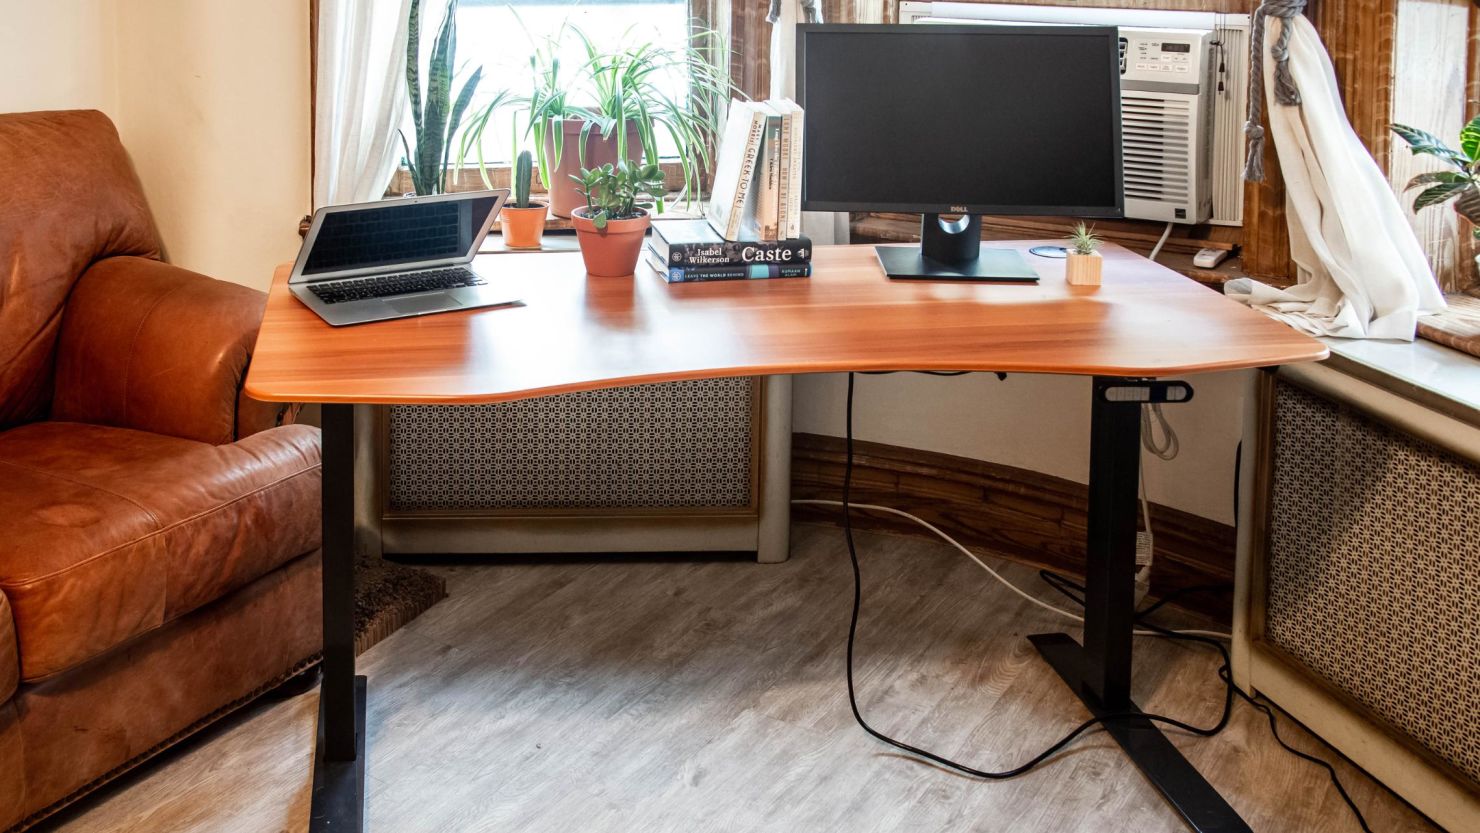 25 Work From Home Gift Ideas: Chairs, Desks, Webcams, and